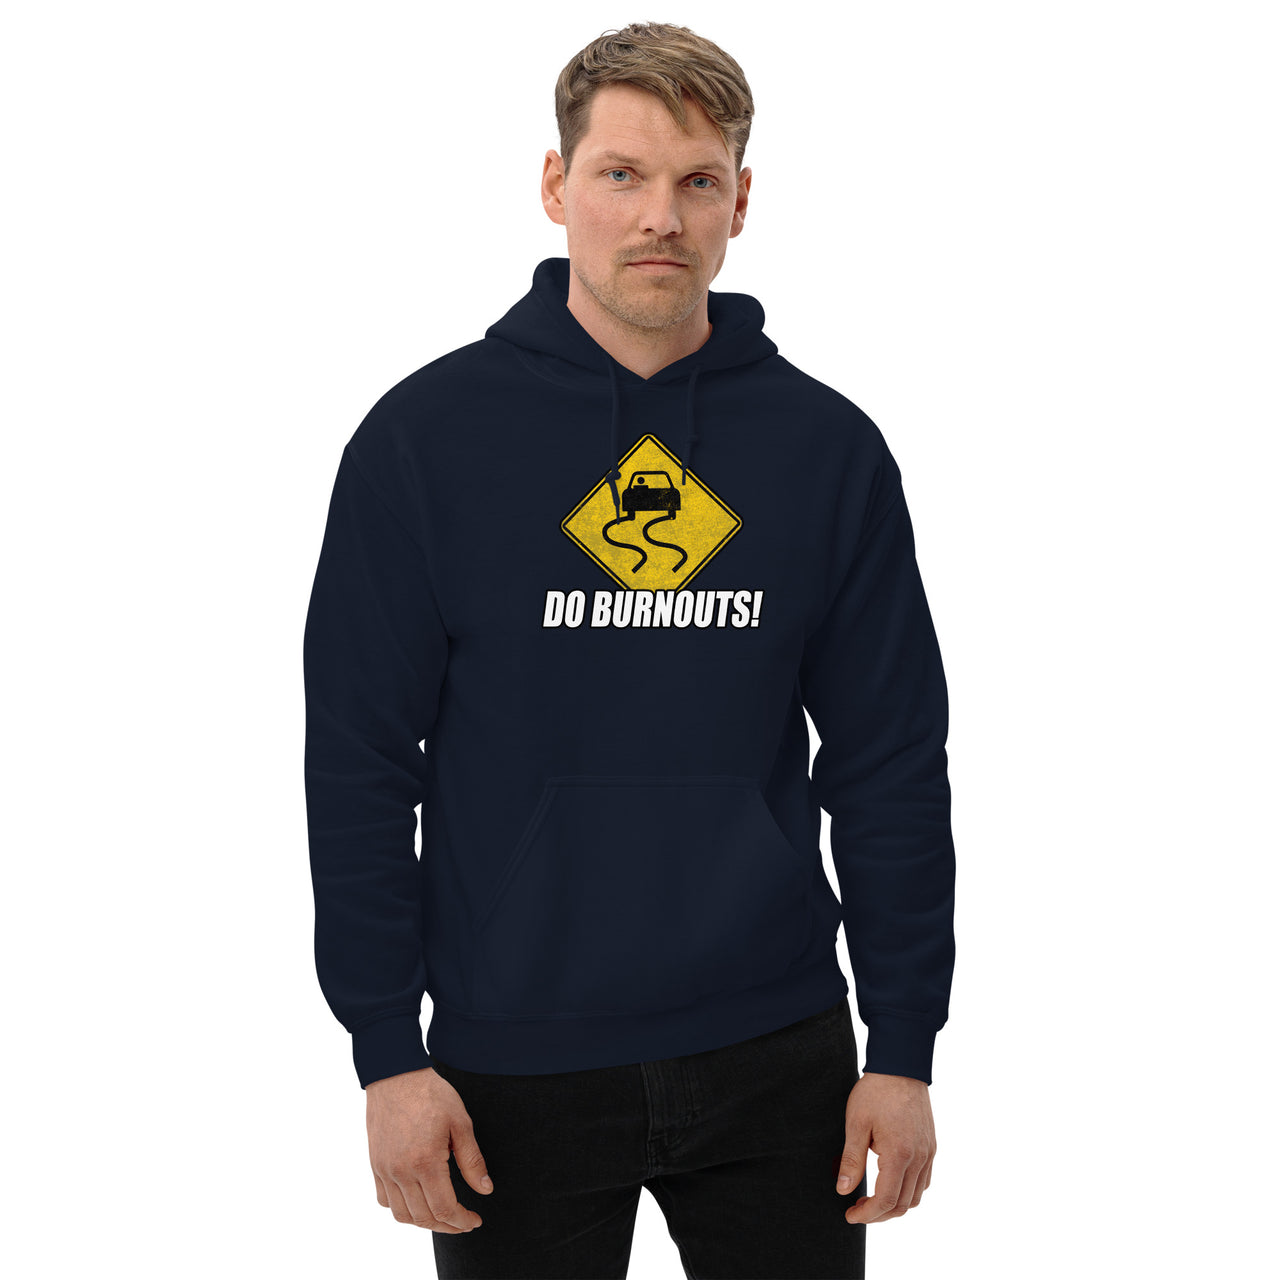 burnout sign hoodie for car enthusiasts modeled in navy